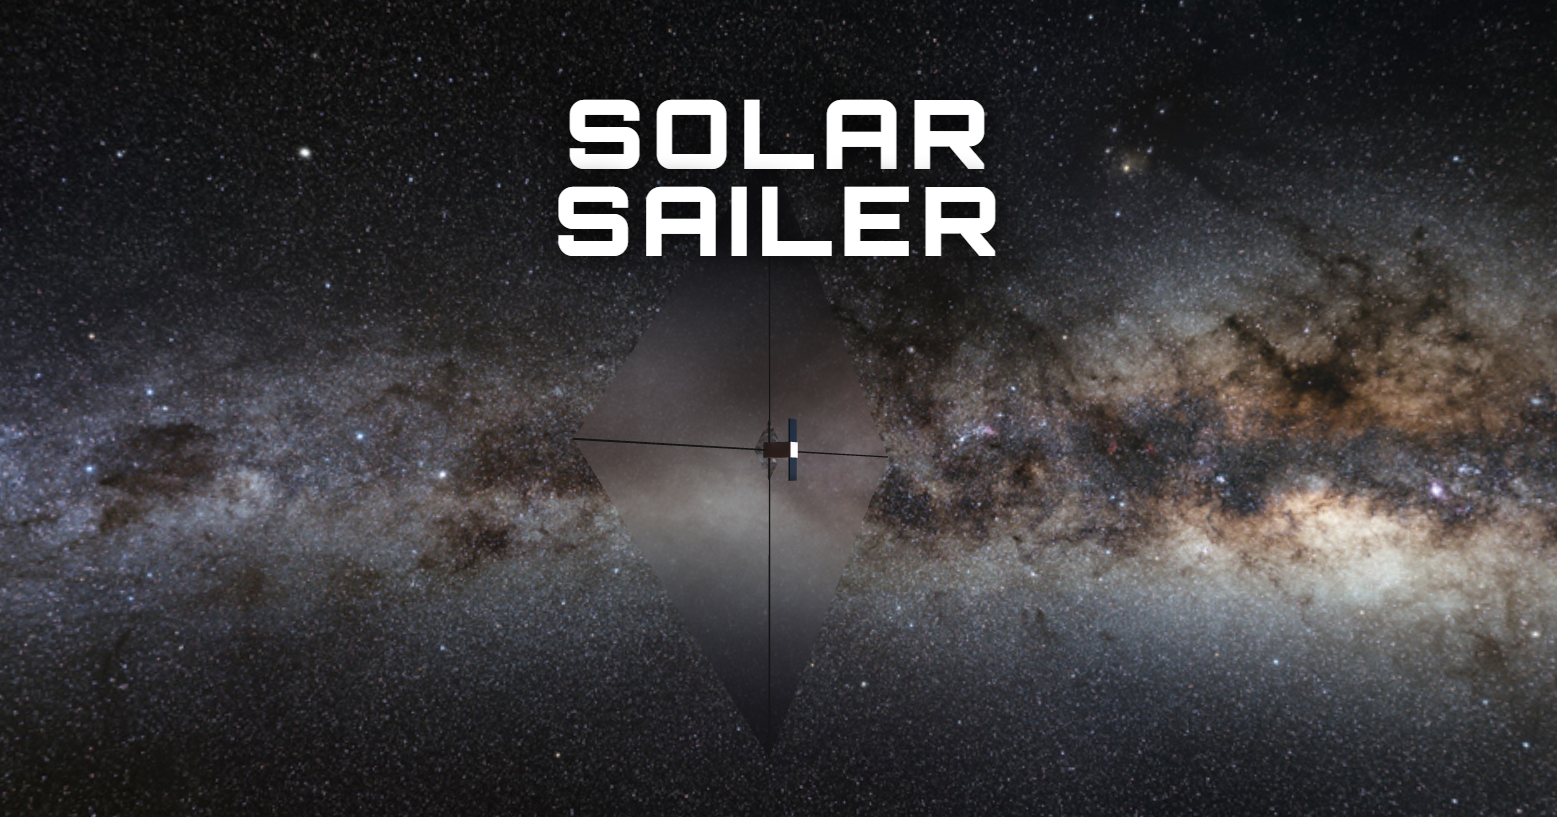 3D render of a basic solar sail spacecraft in space with the text Solar Sailer in white